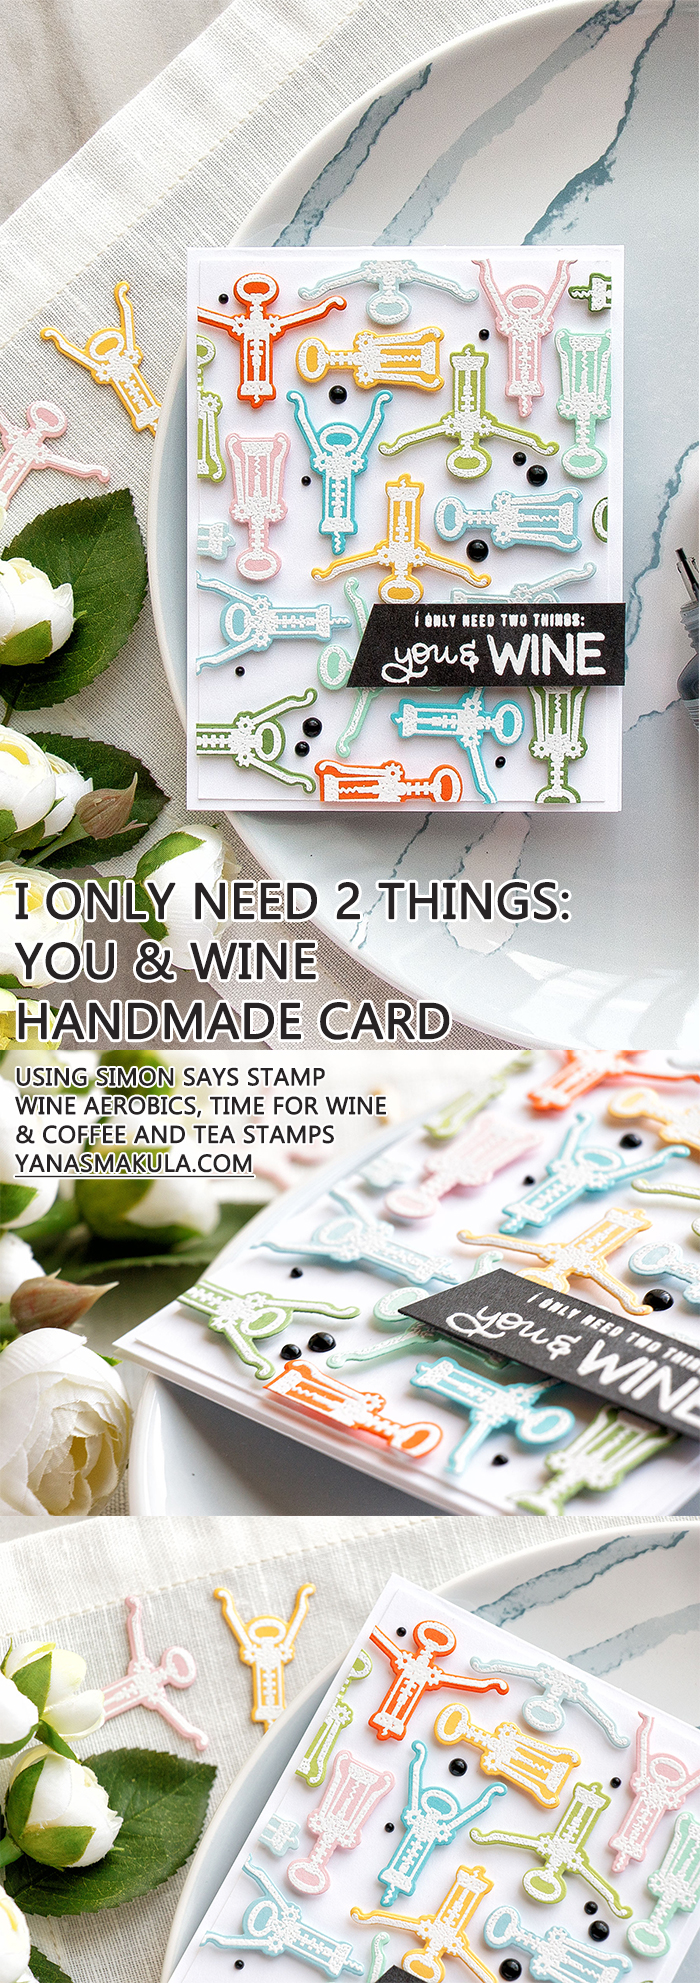 Simon Says Stamp | I Only Need Two Things: You & Wine Card by Yana Smakula. Using Simon Says stamp Wine Aerobics, Time for Wine & Coffee and Tea Stamps